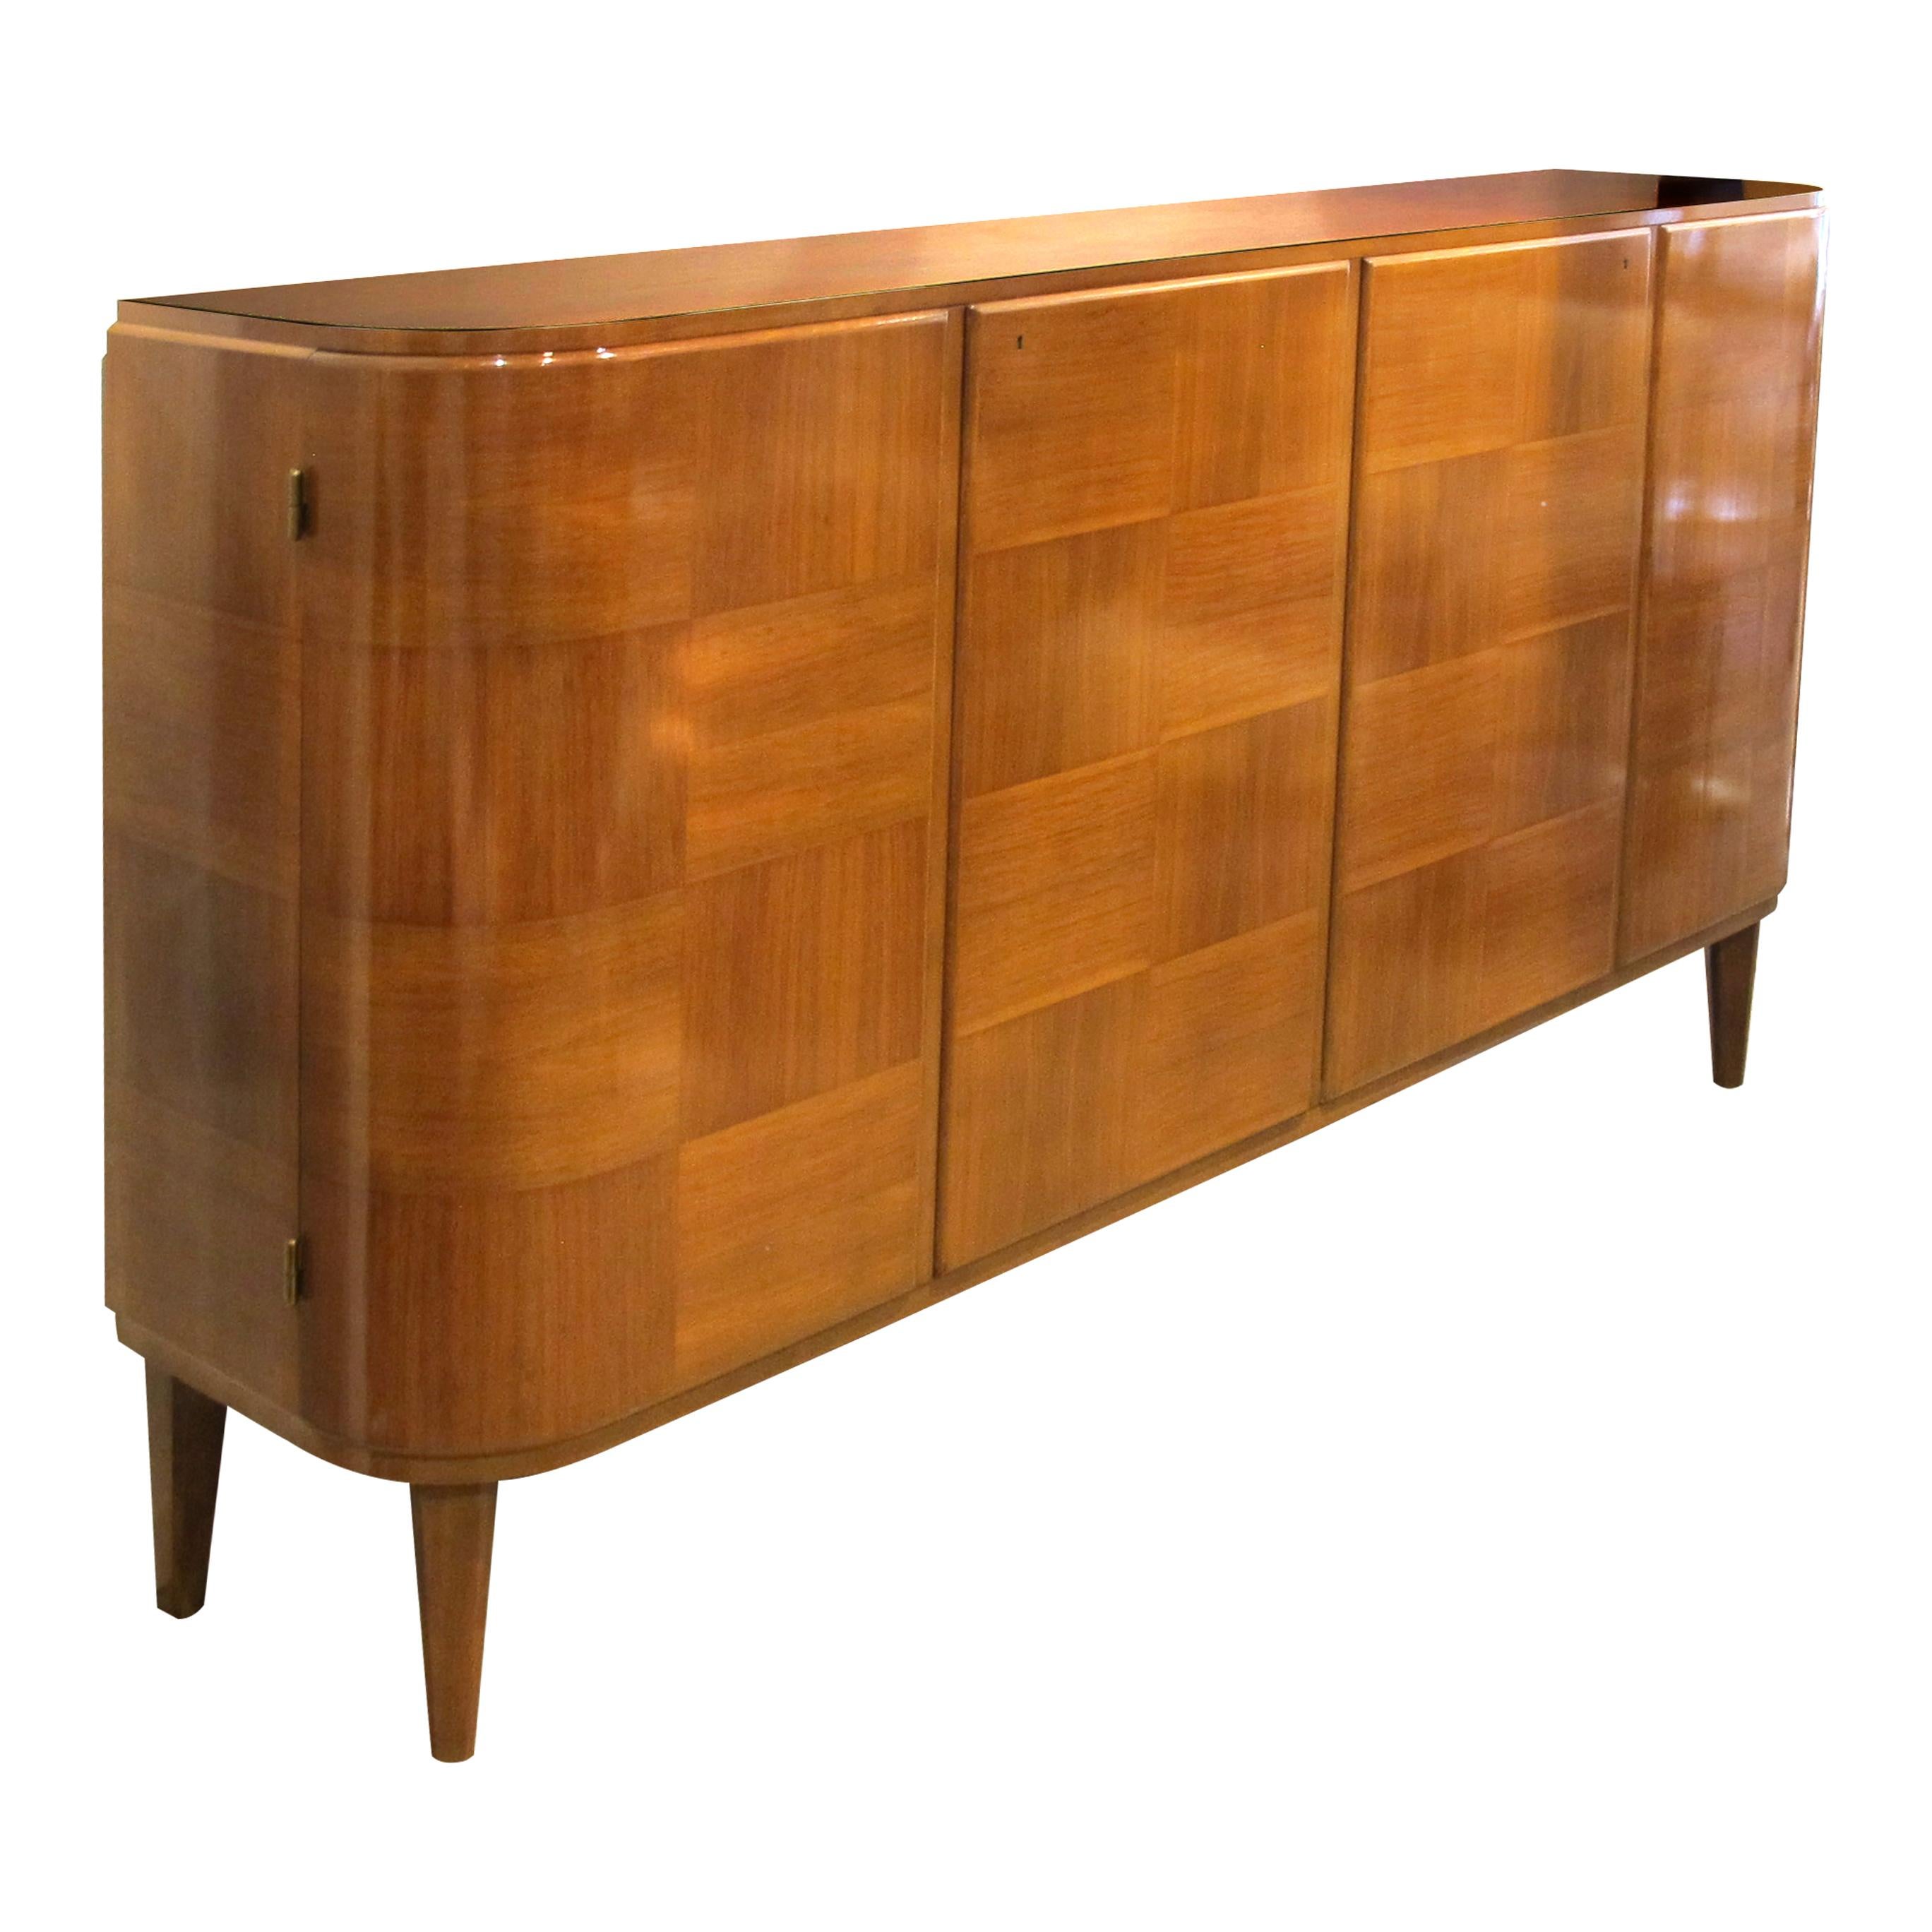 Measuring generously in both height and length, this sideboard offers ample storage space for your cherished belongings. The distinct sections and drawers thoughtfully incorporated into its design provide practicality without compromising on